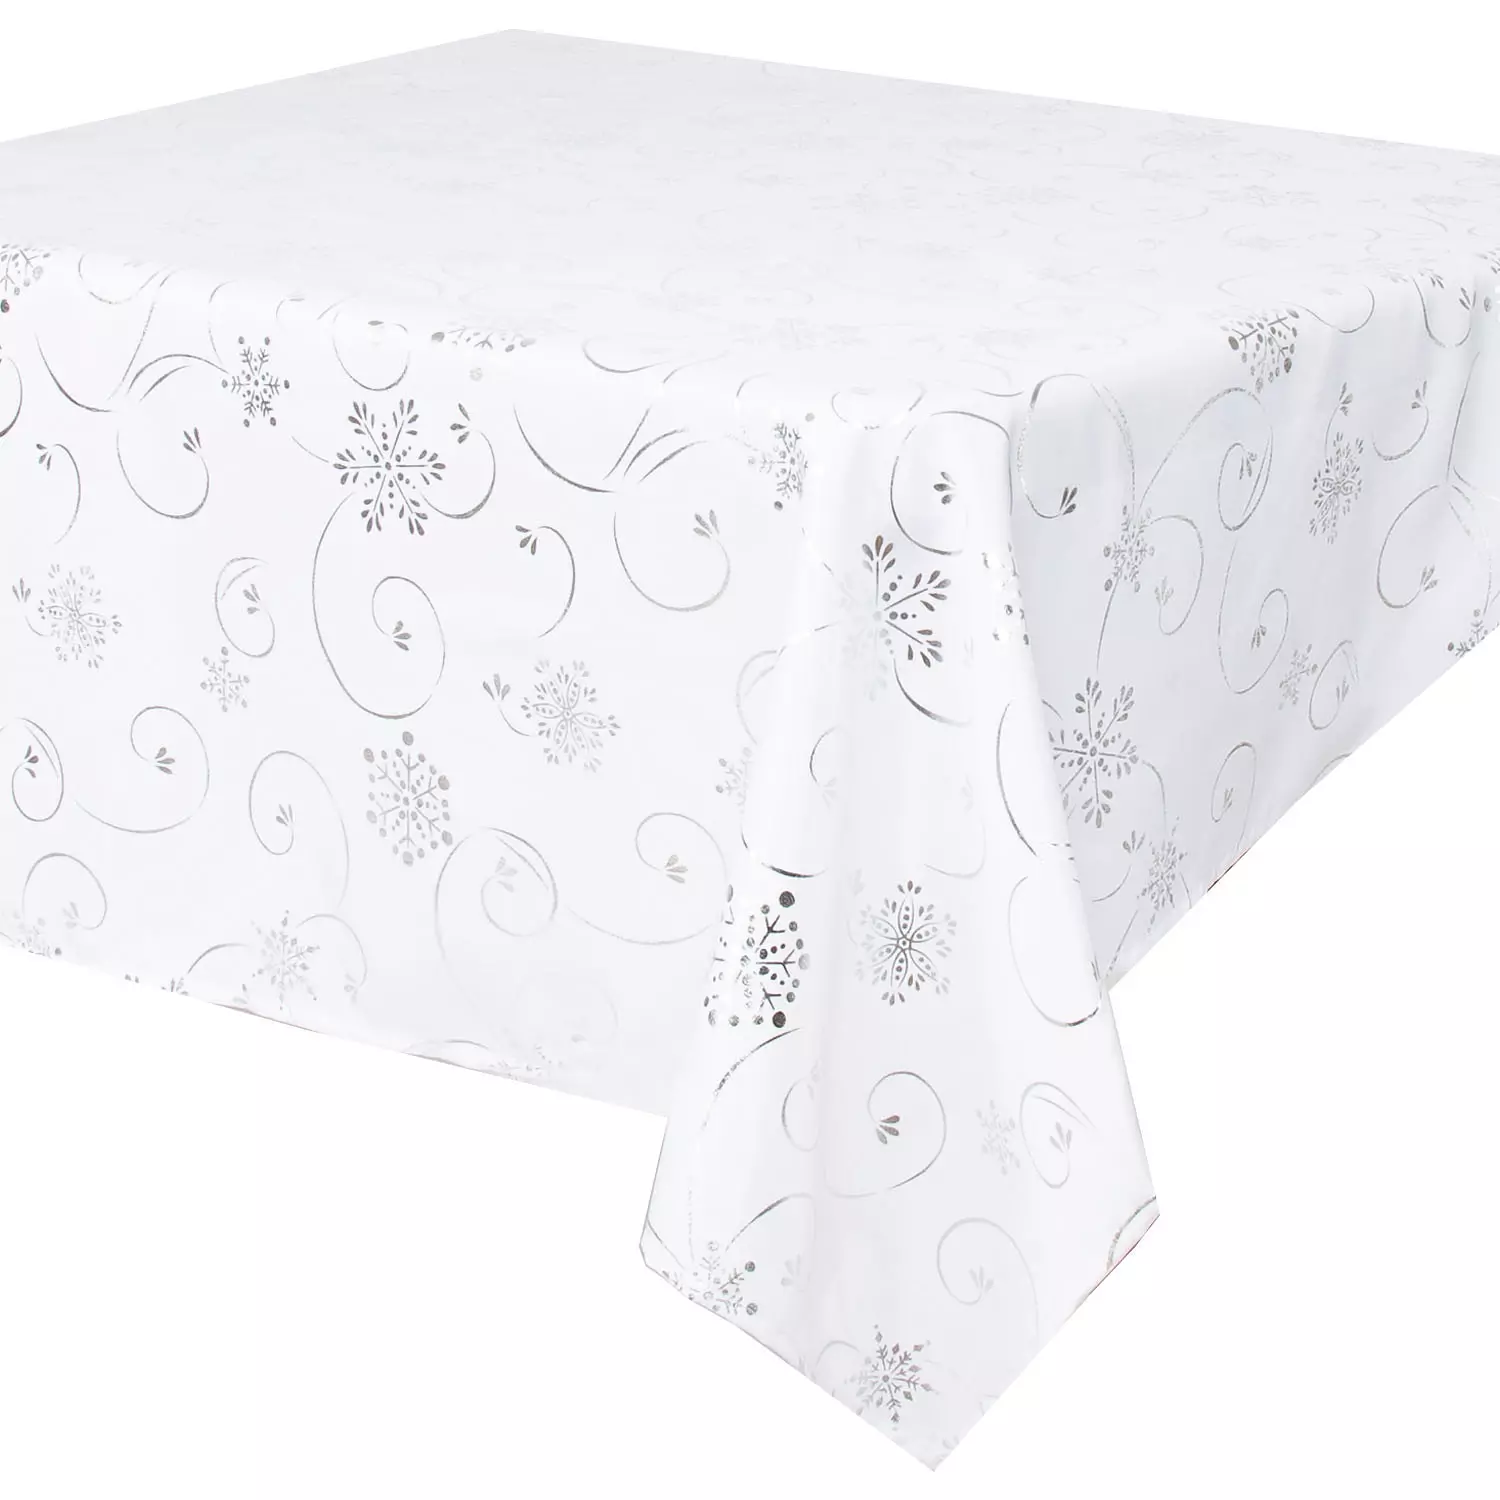 Elegance Collection, Christmas holiday fabric tablecloth, foil printed snowflakes and swirls, 60"x84", white